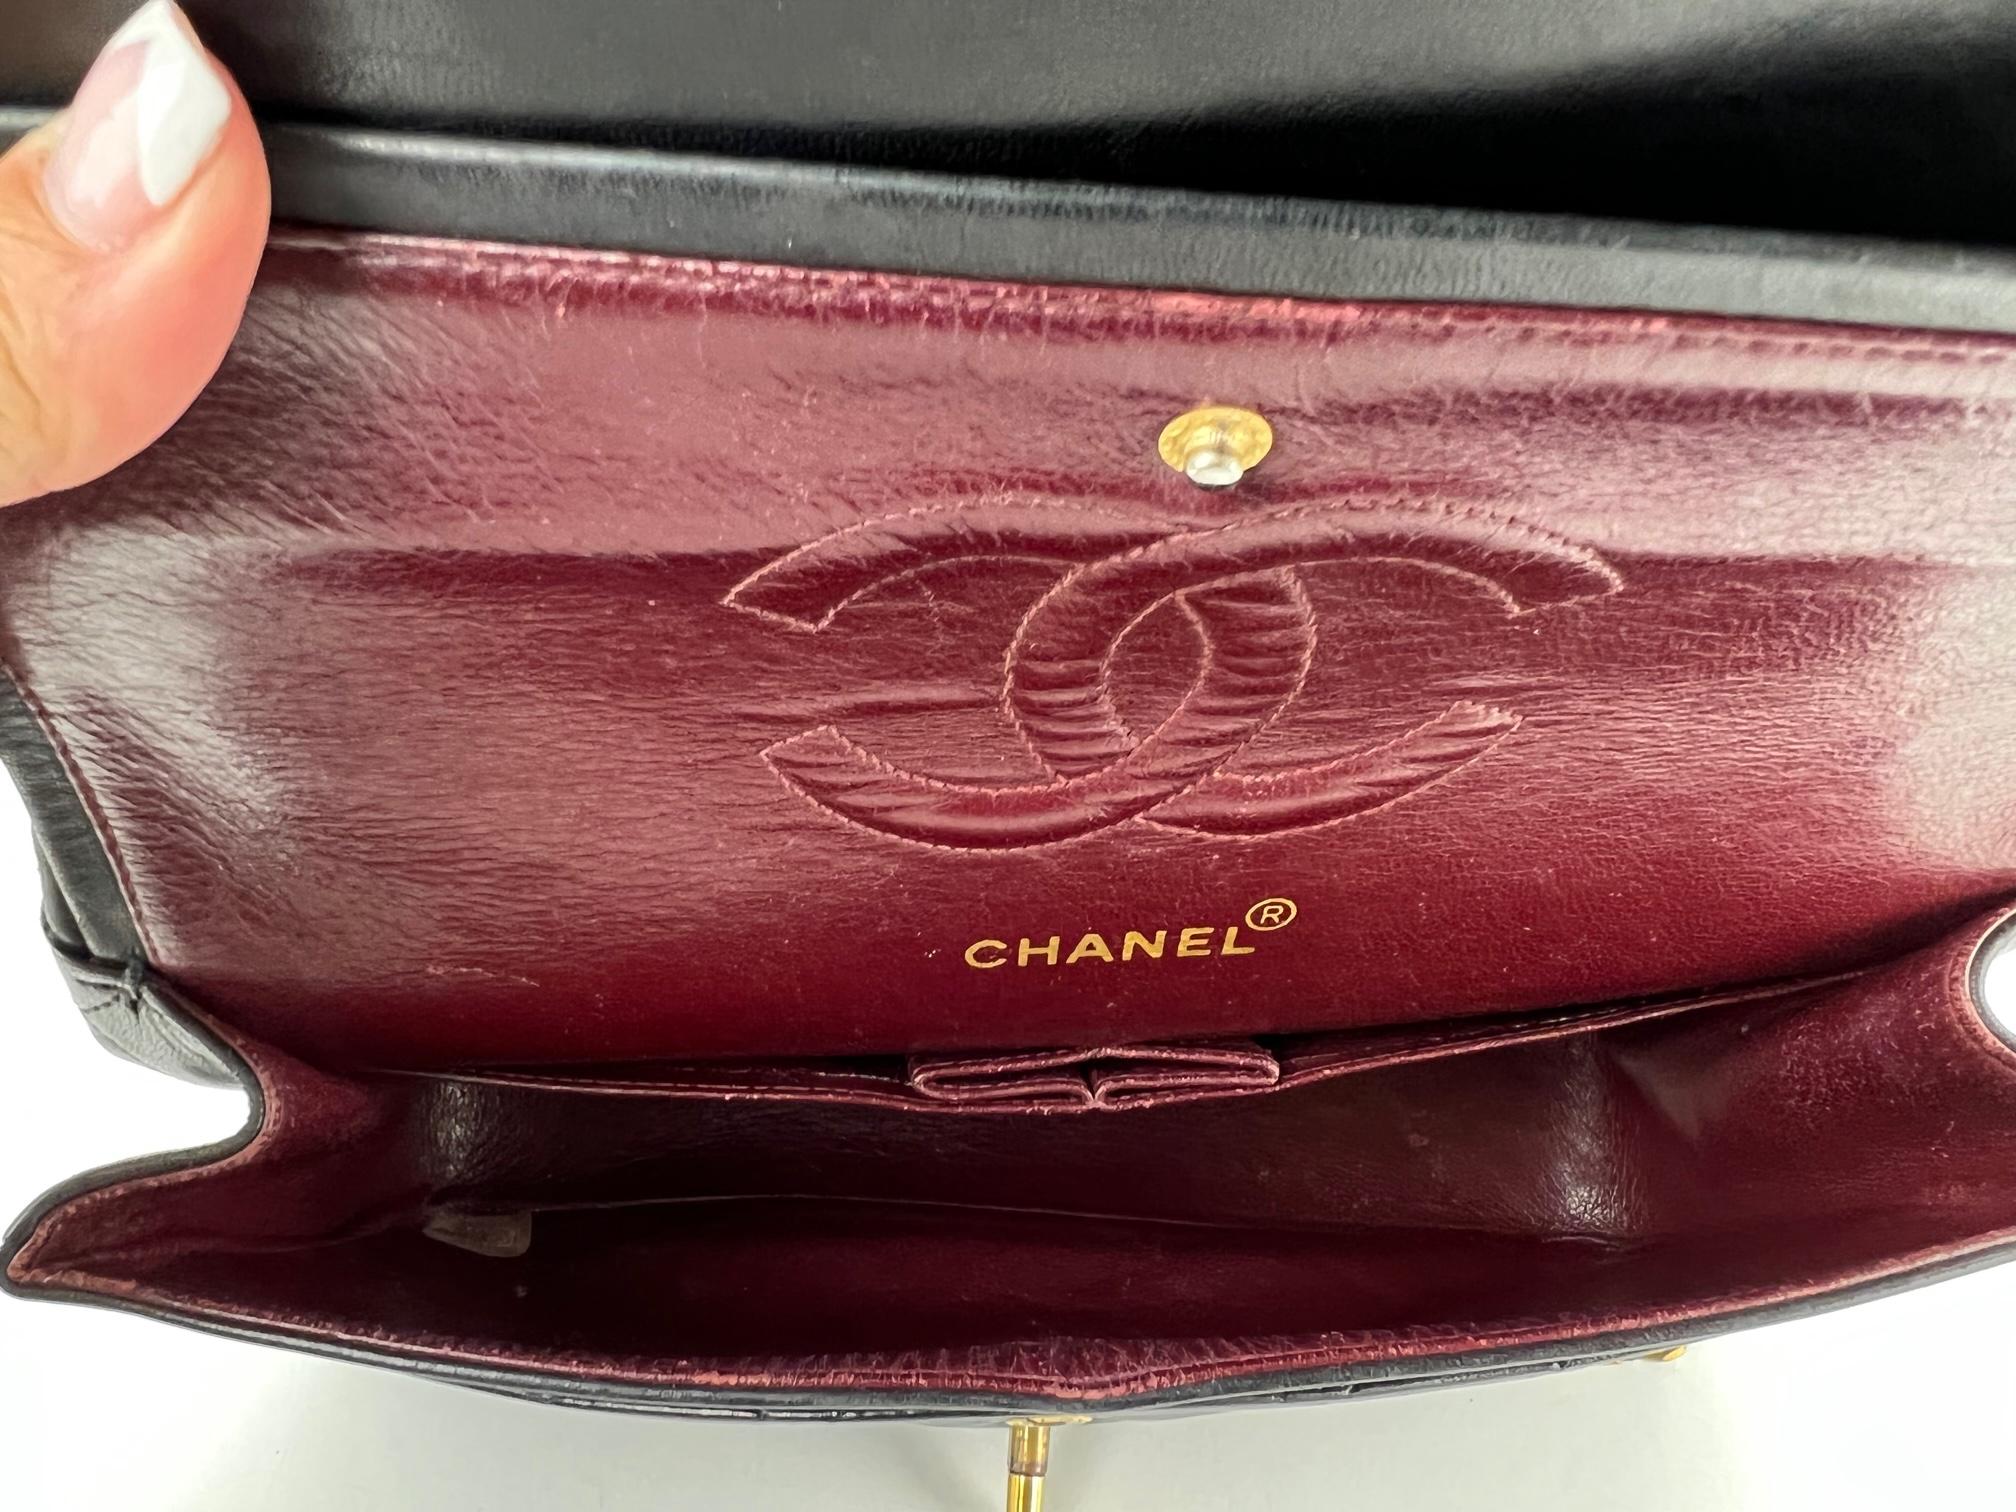 Pre-Owned  100% Authentic
CHANEL Classic Medium Double Flap
Quilted Smooth Black Leather
RATING: B...Very Good, well maintained,
shows minor signs of wear
MATERIAL: smooth caviar diamond-
quilted Leather
HANDLE:  leather threaded through gold
chain